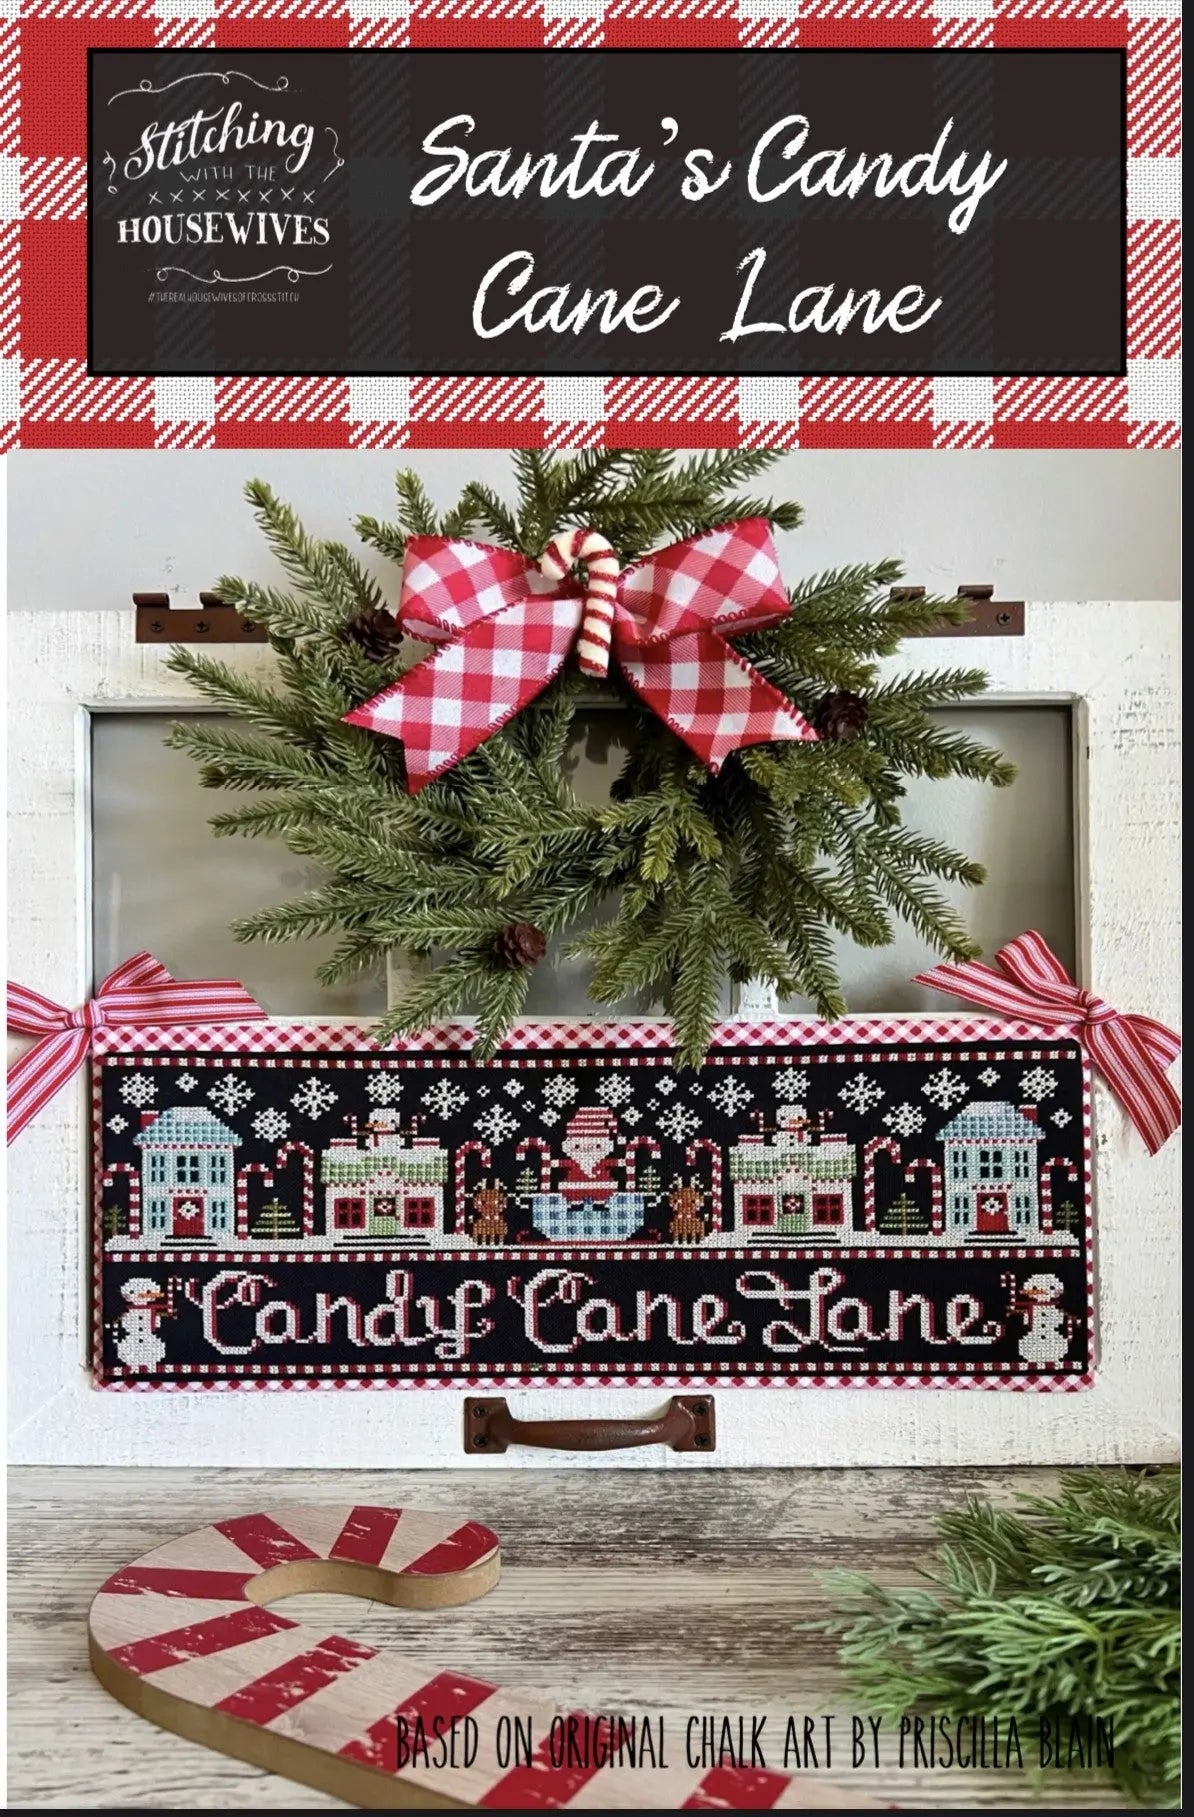 Santa's Candy Cane Lane by Stitching With the Housewives Stitching with the Housewives